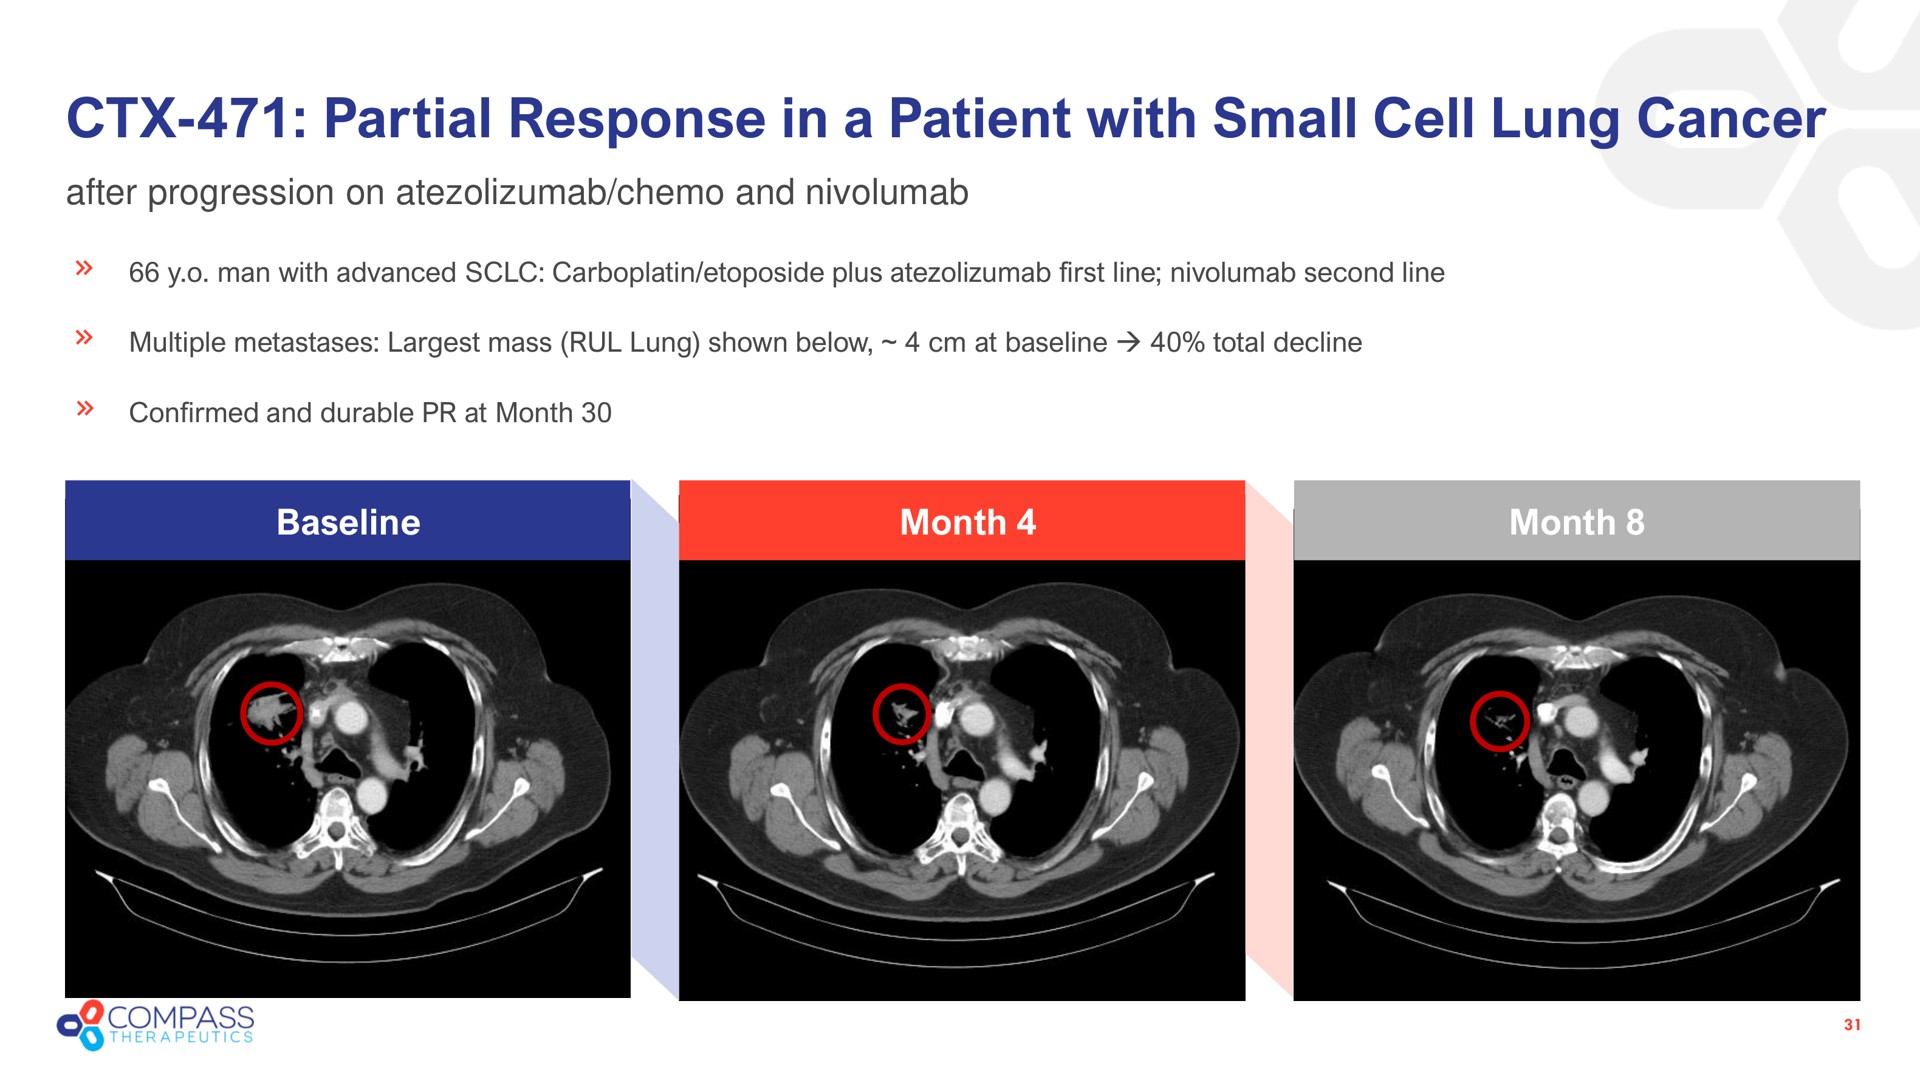 partial response in a patient with small cell lung cancer i | Compass Therapeutics